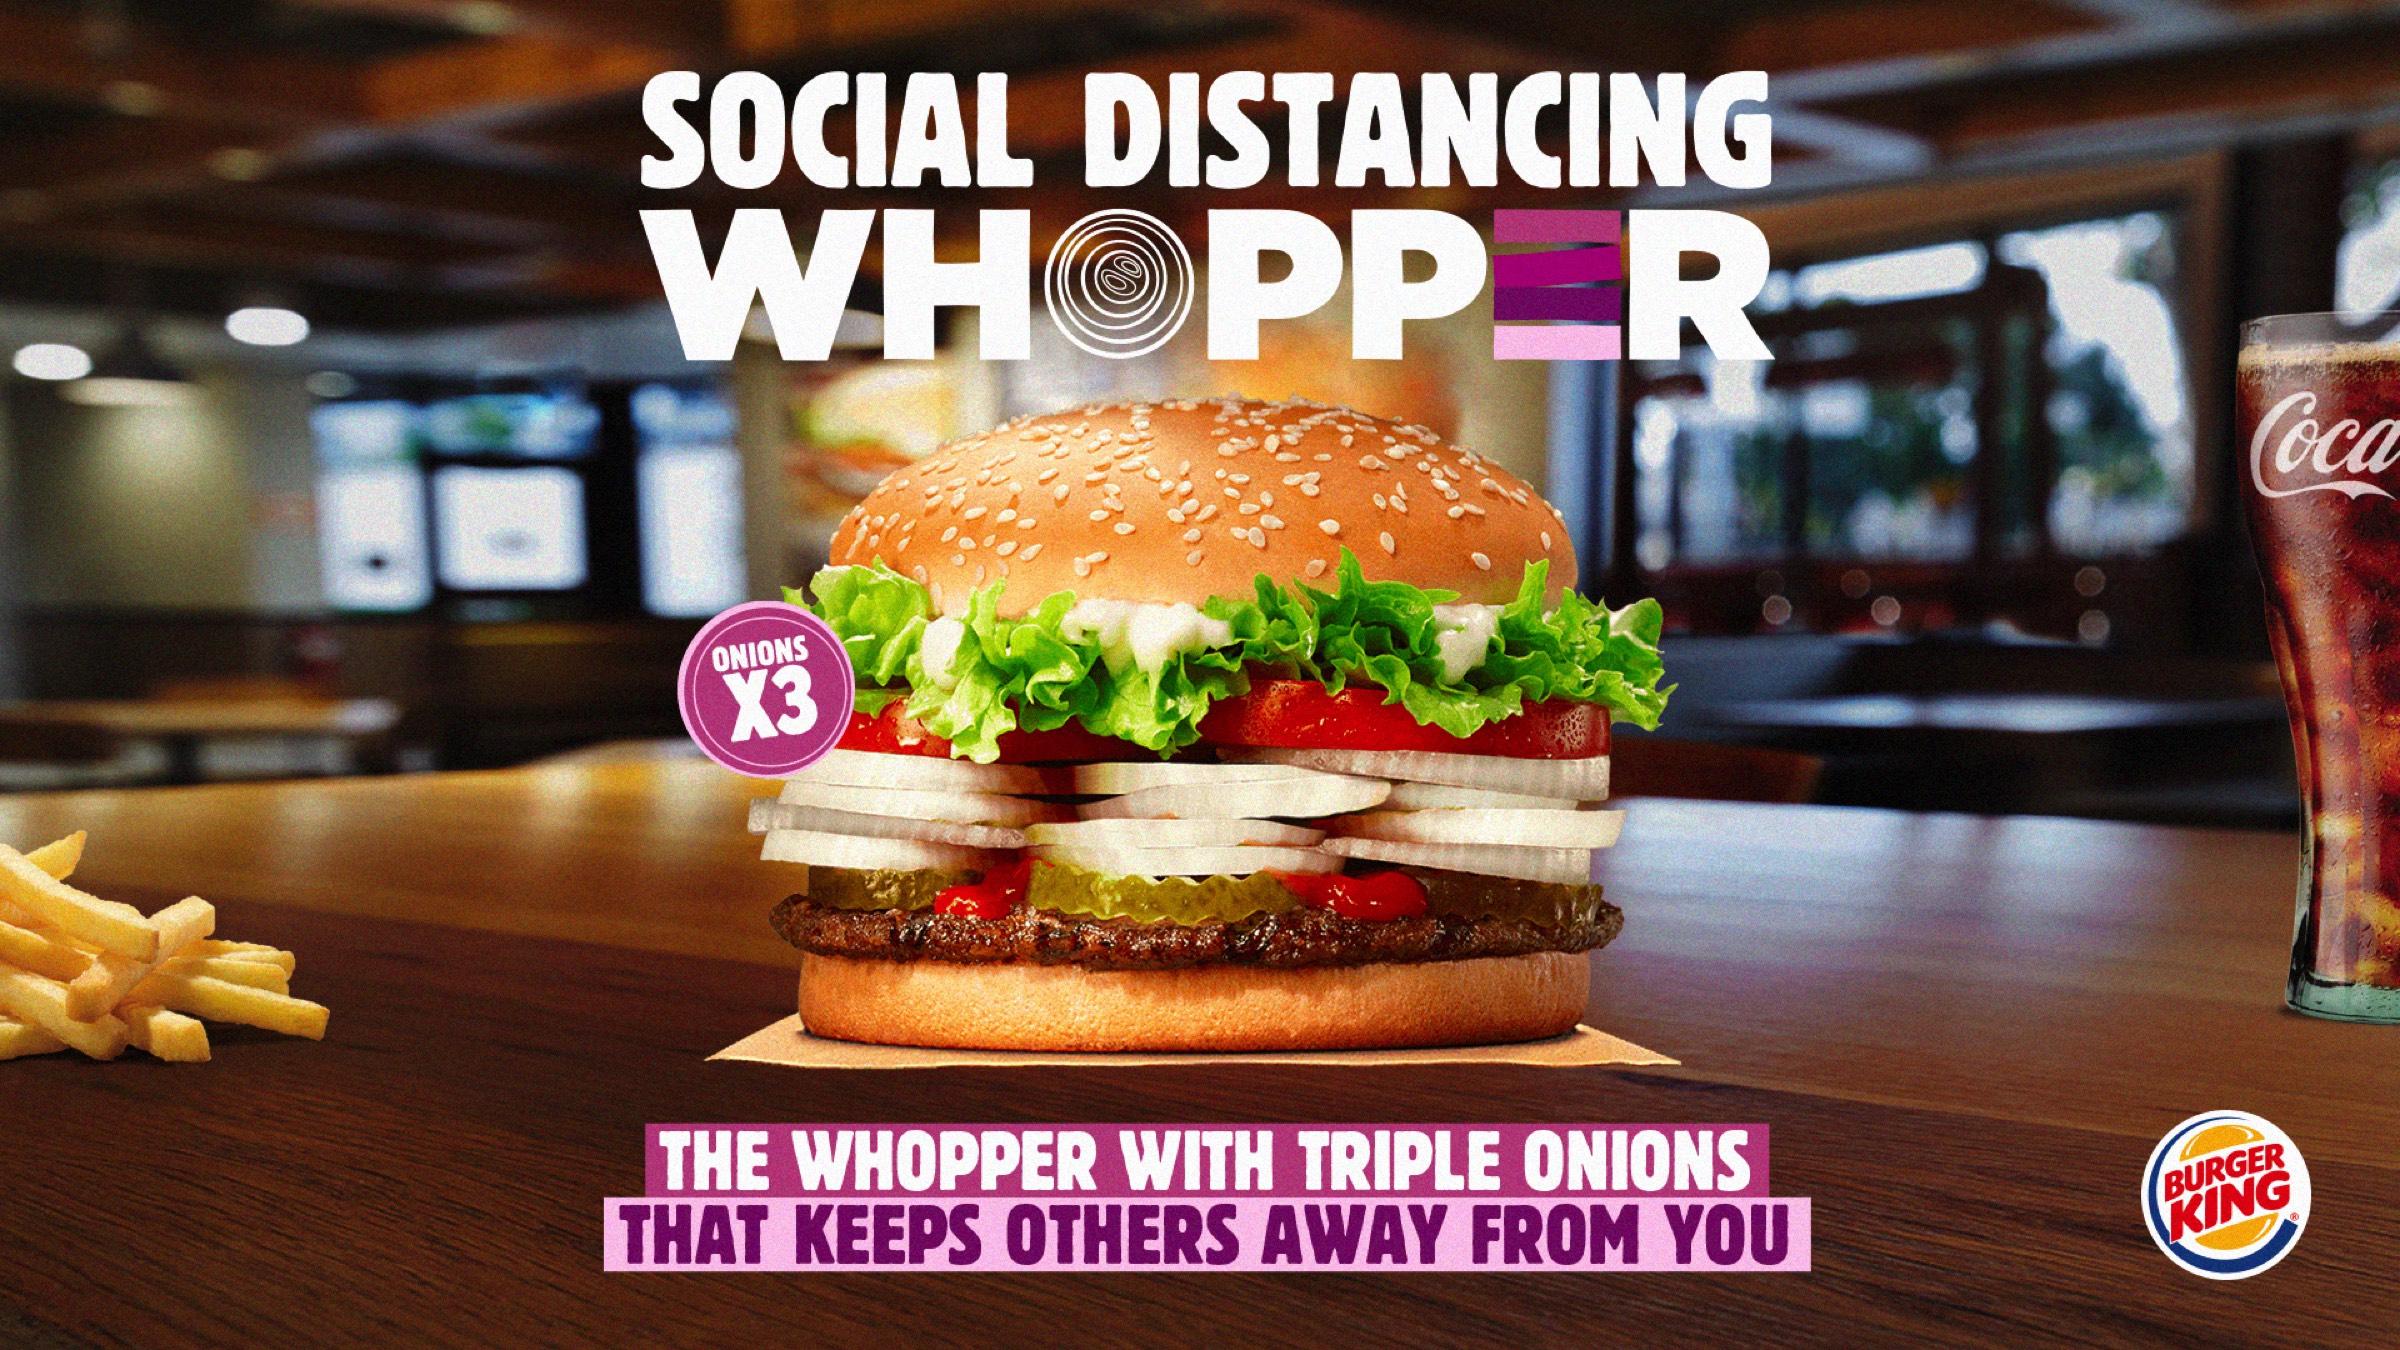 Burger King: The Social Distancing Whopper